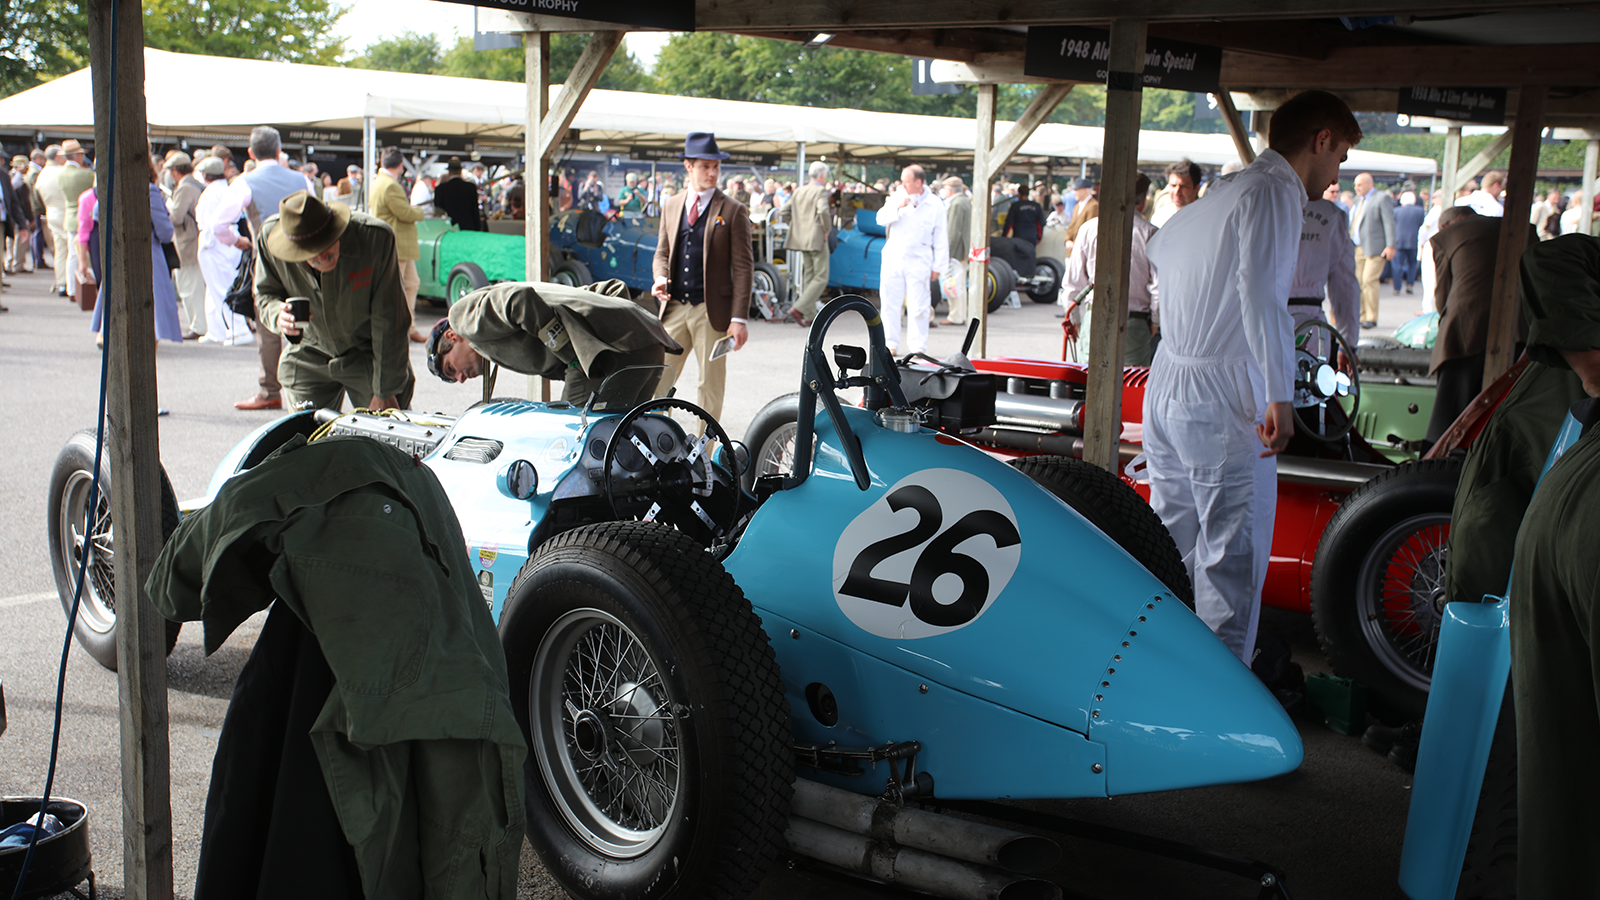 Goodwood Revival 2019: in pictures